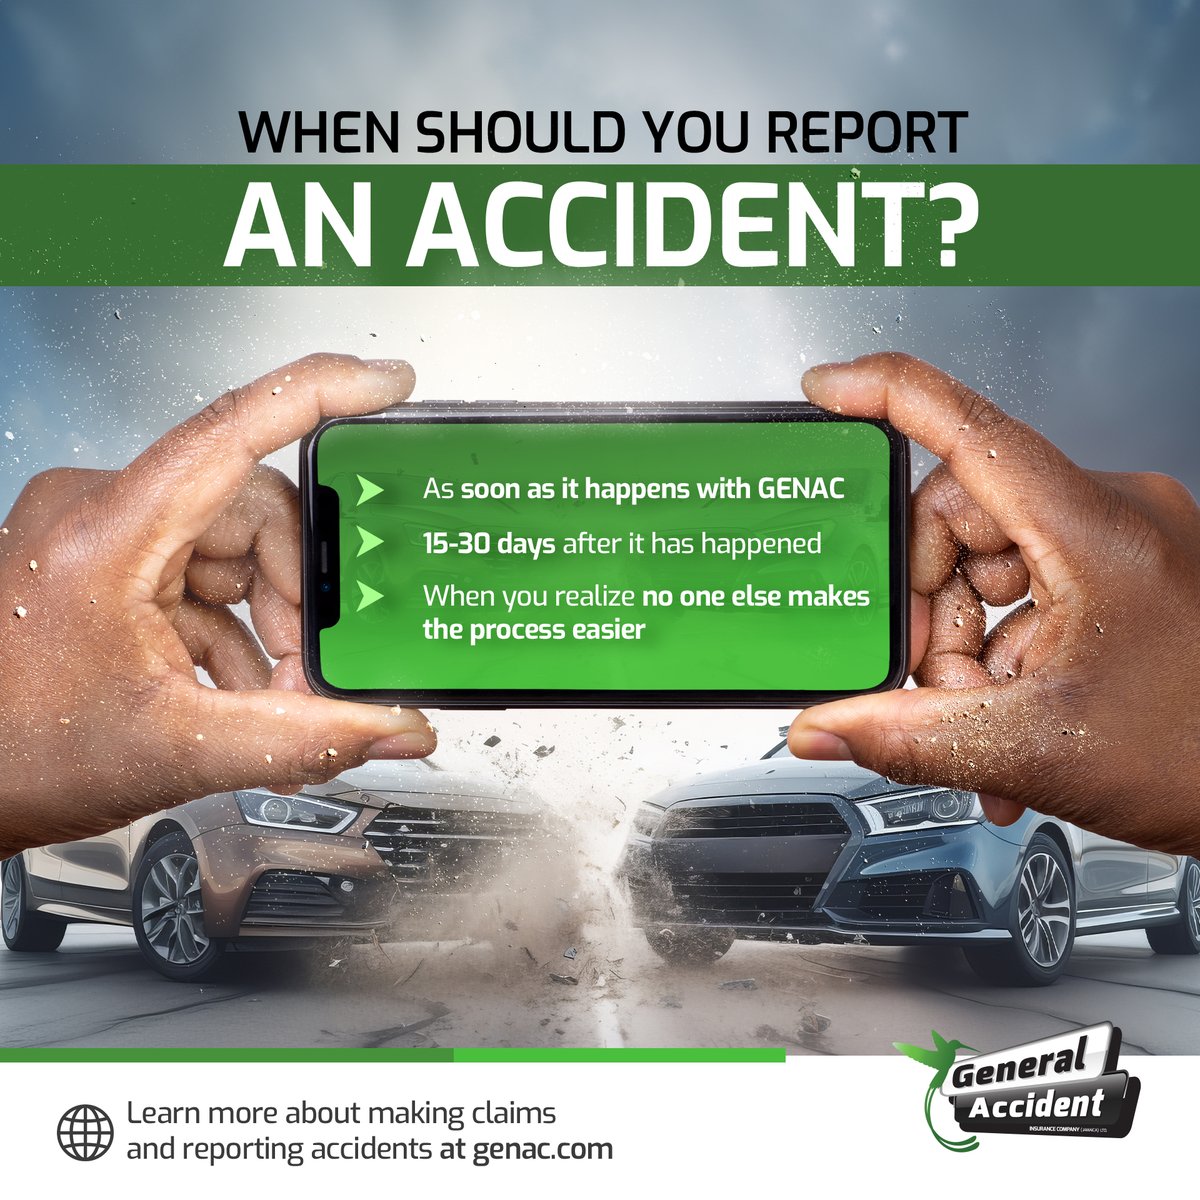 When are you most likely to report an accident? Tell us in the comments!
#GenacJA #Jamaica #Insurance #BackUpPlan #AccidentReports